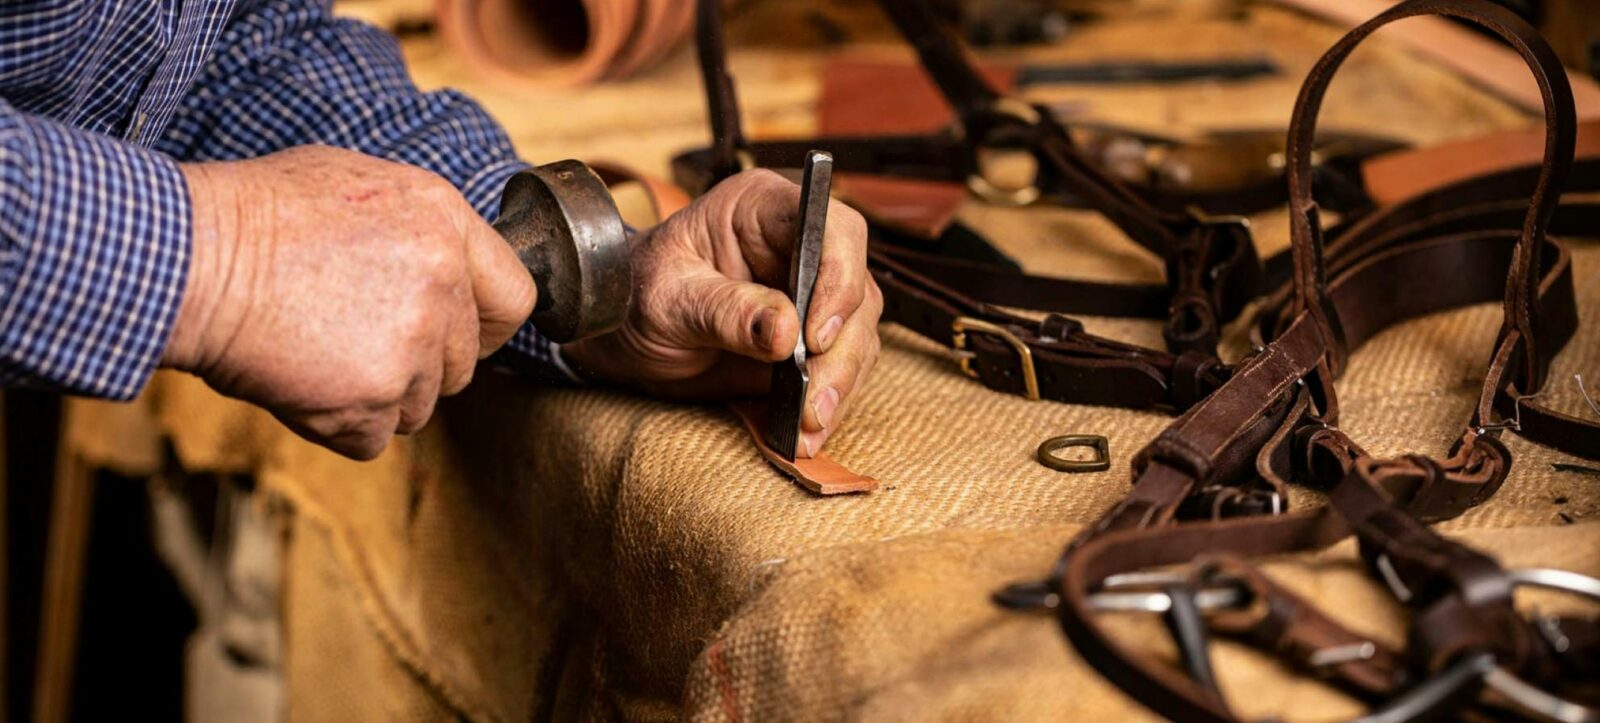 A pair of hands, using tools to put a hole in a leather piece for a horse bridle.